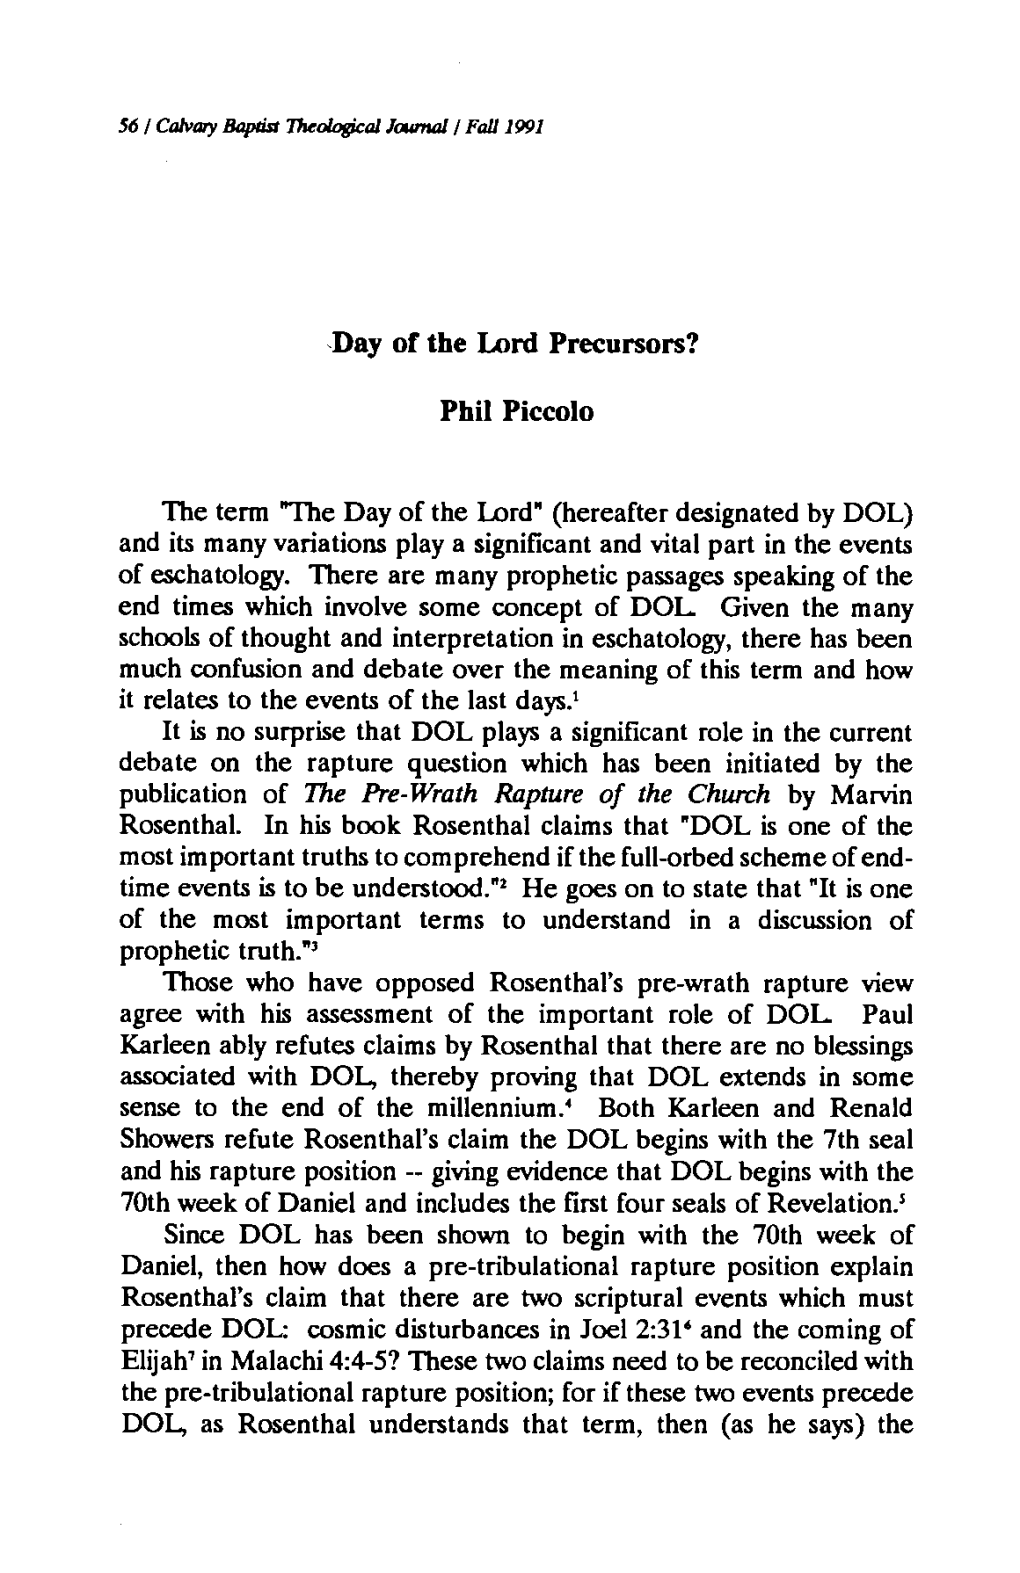 Day of the Lord Precursors?